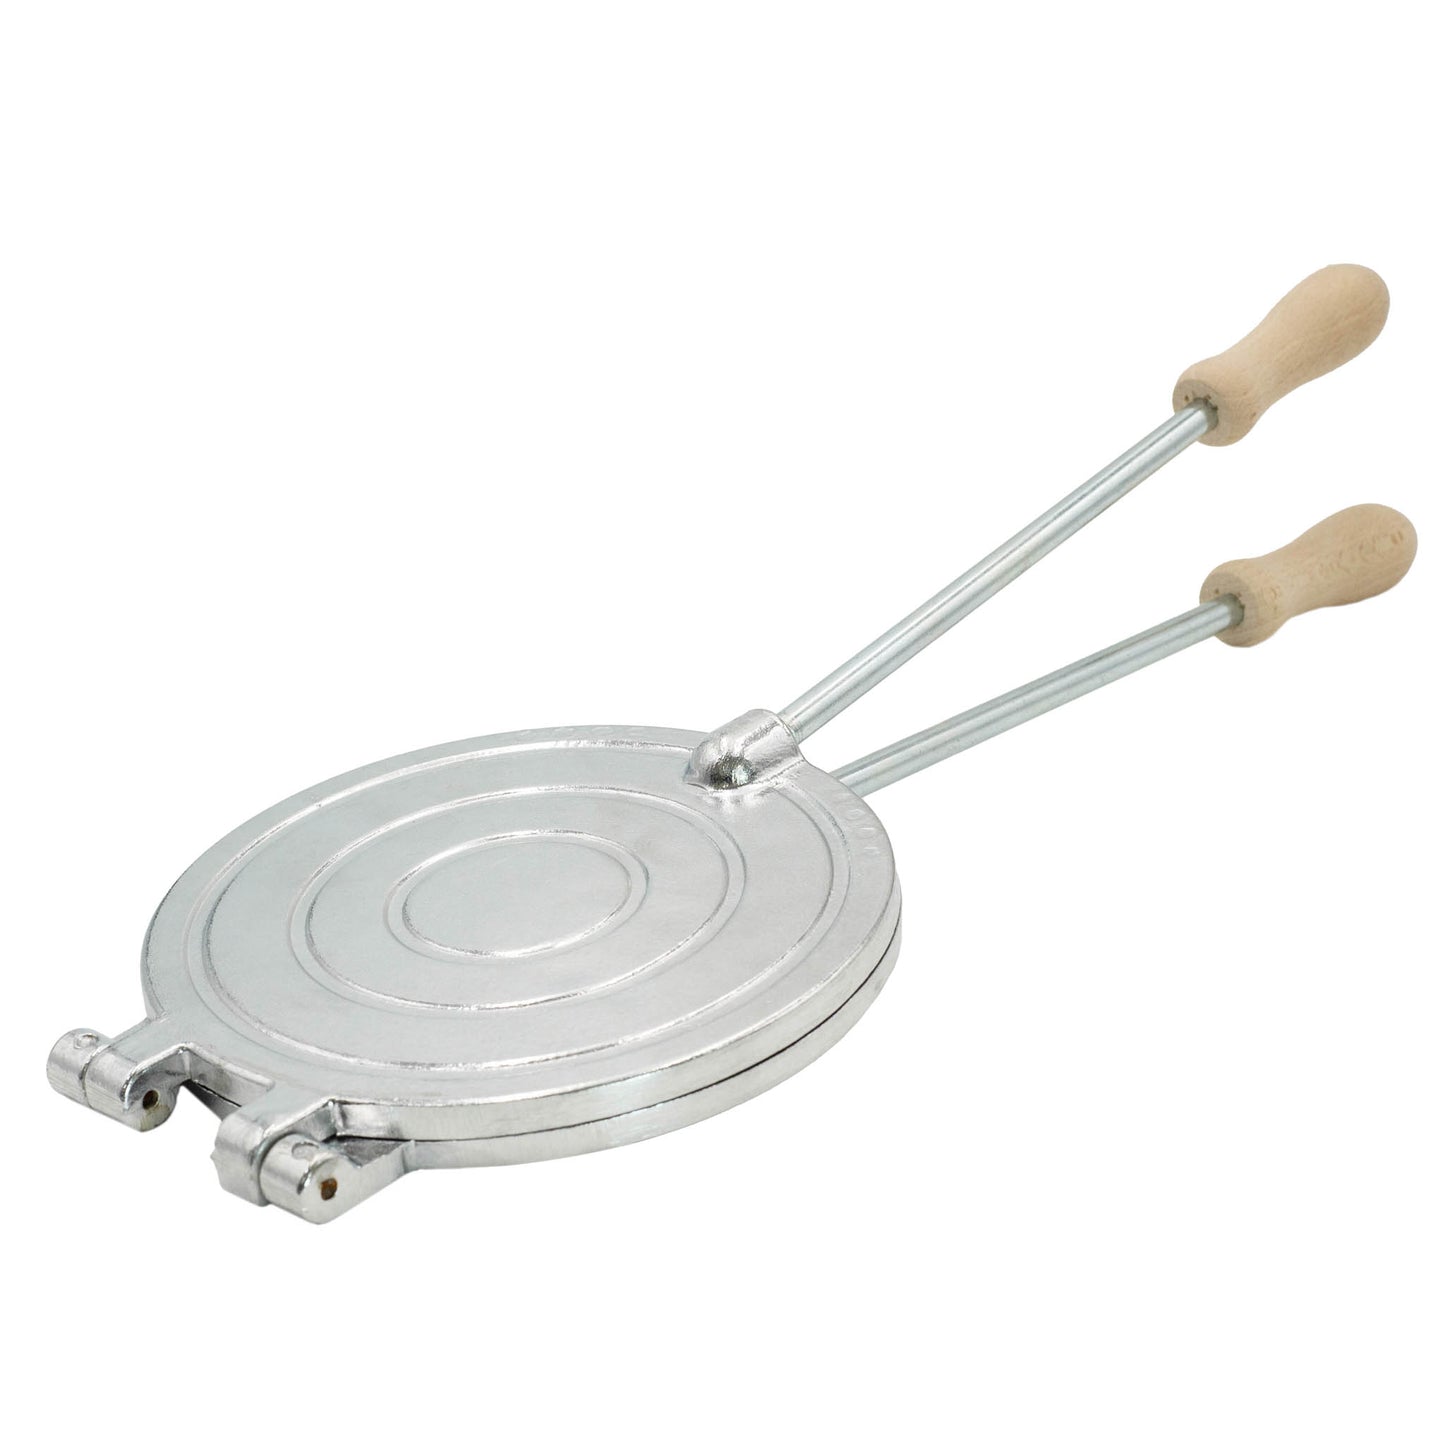 Aluminium manual pizzelle waffle maker with a 4 part square pattern. 